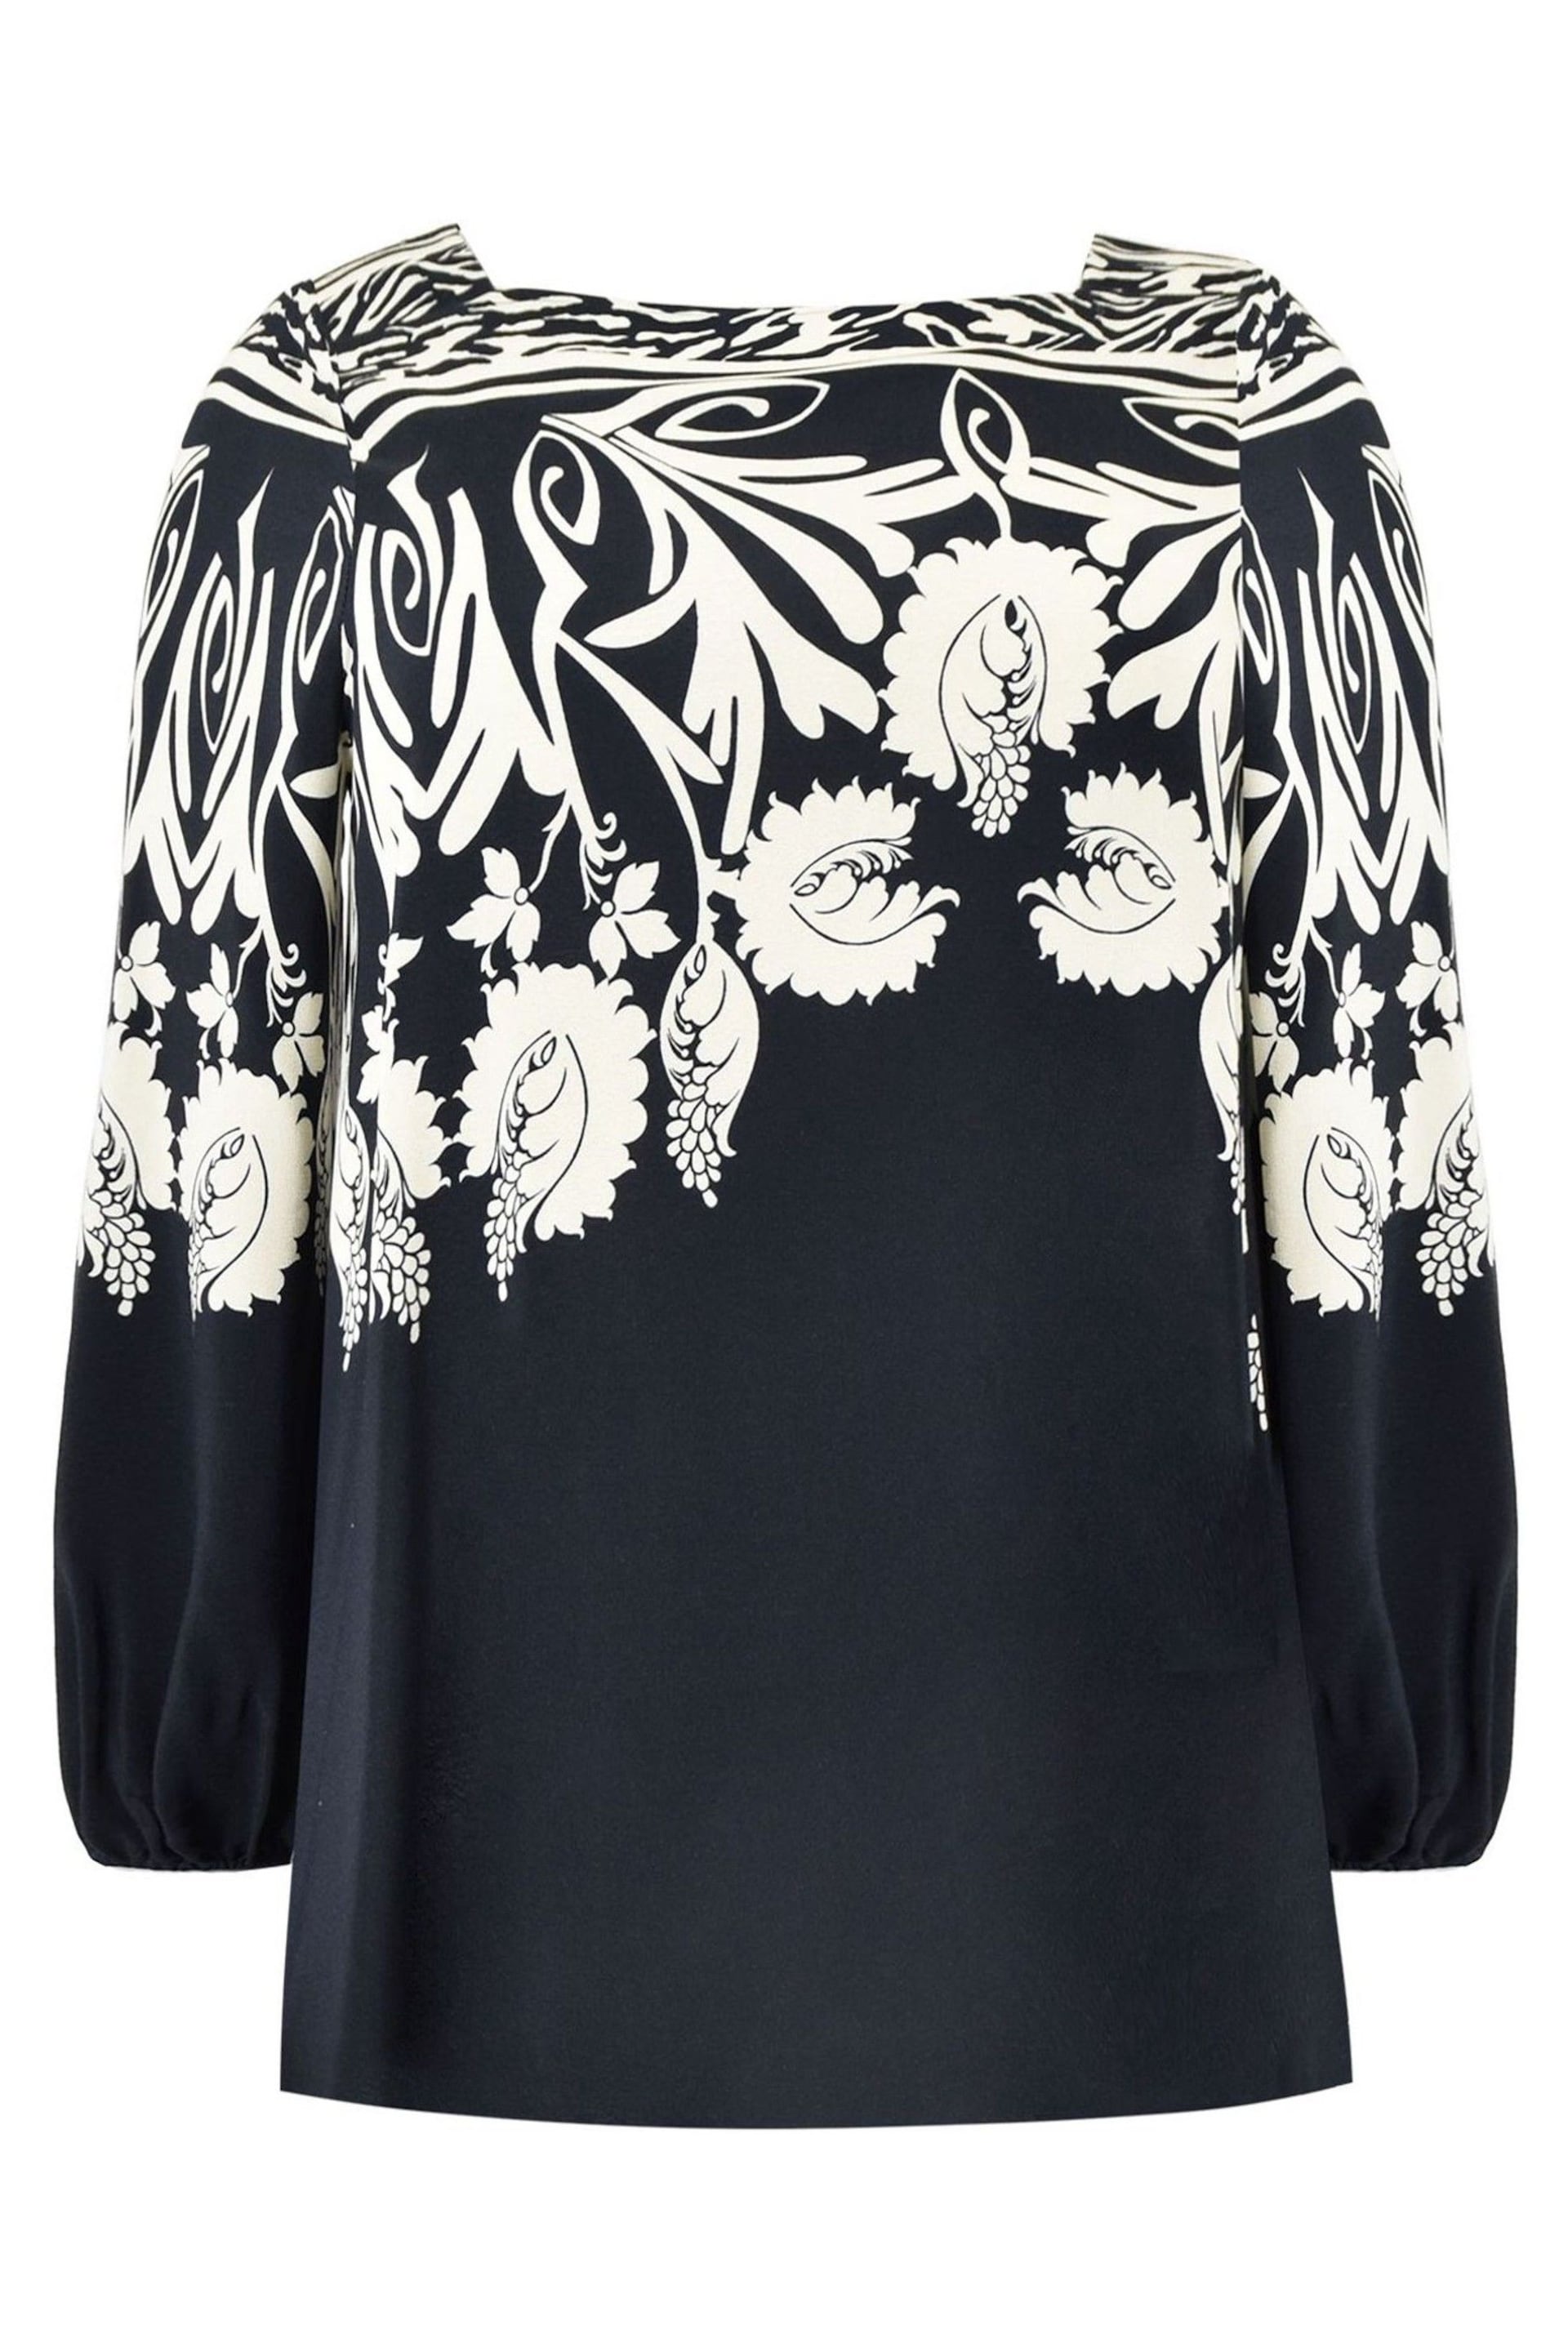 Live Unlimited Black Border Print Relaxed Blouse - Image 5 of 5